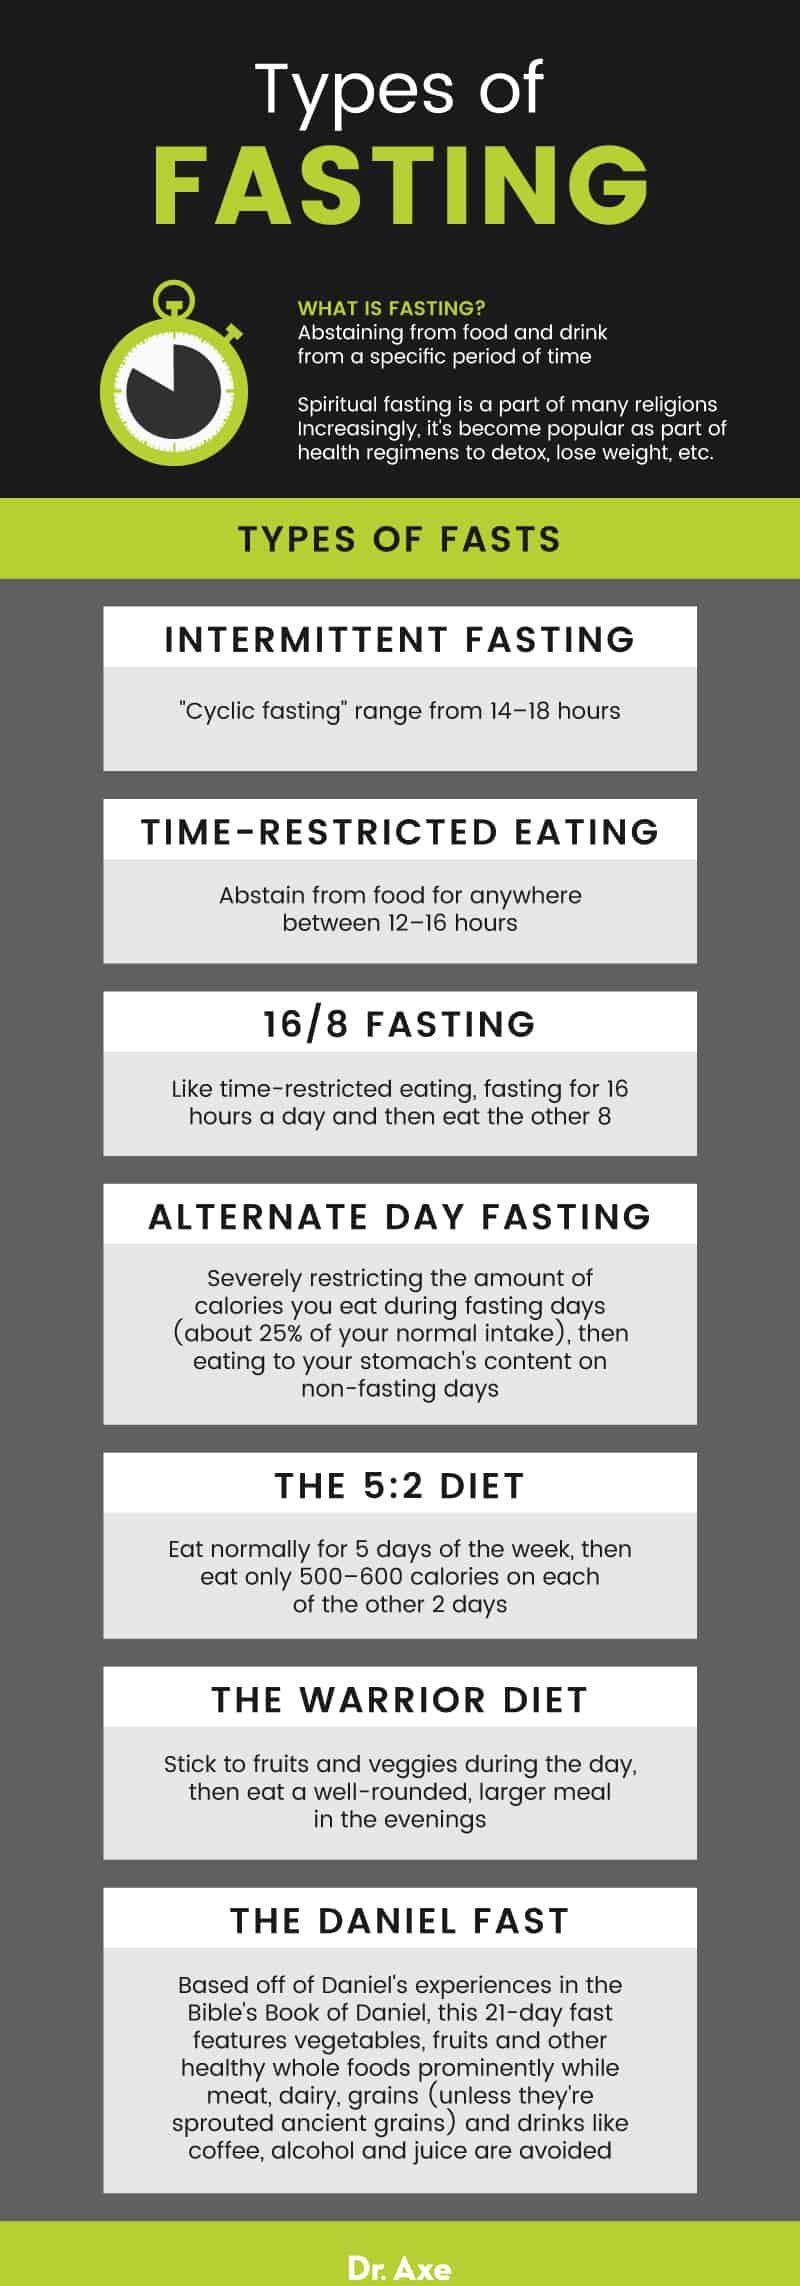 Types of fasting - Dr. Axe